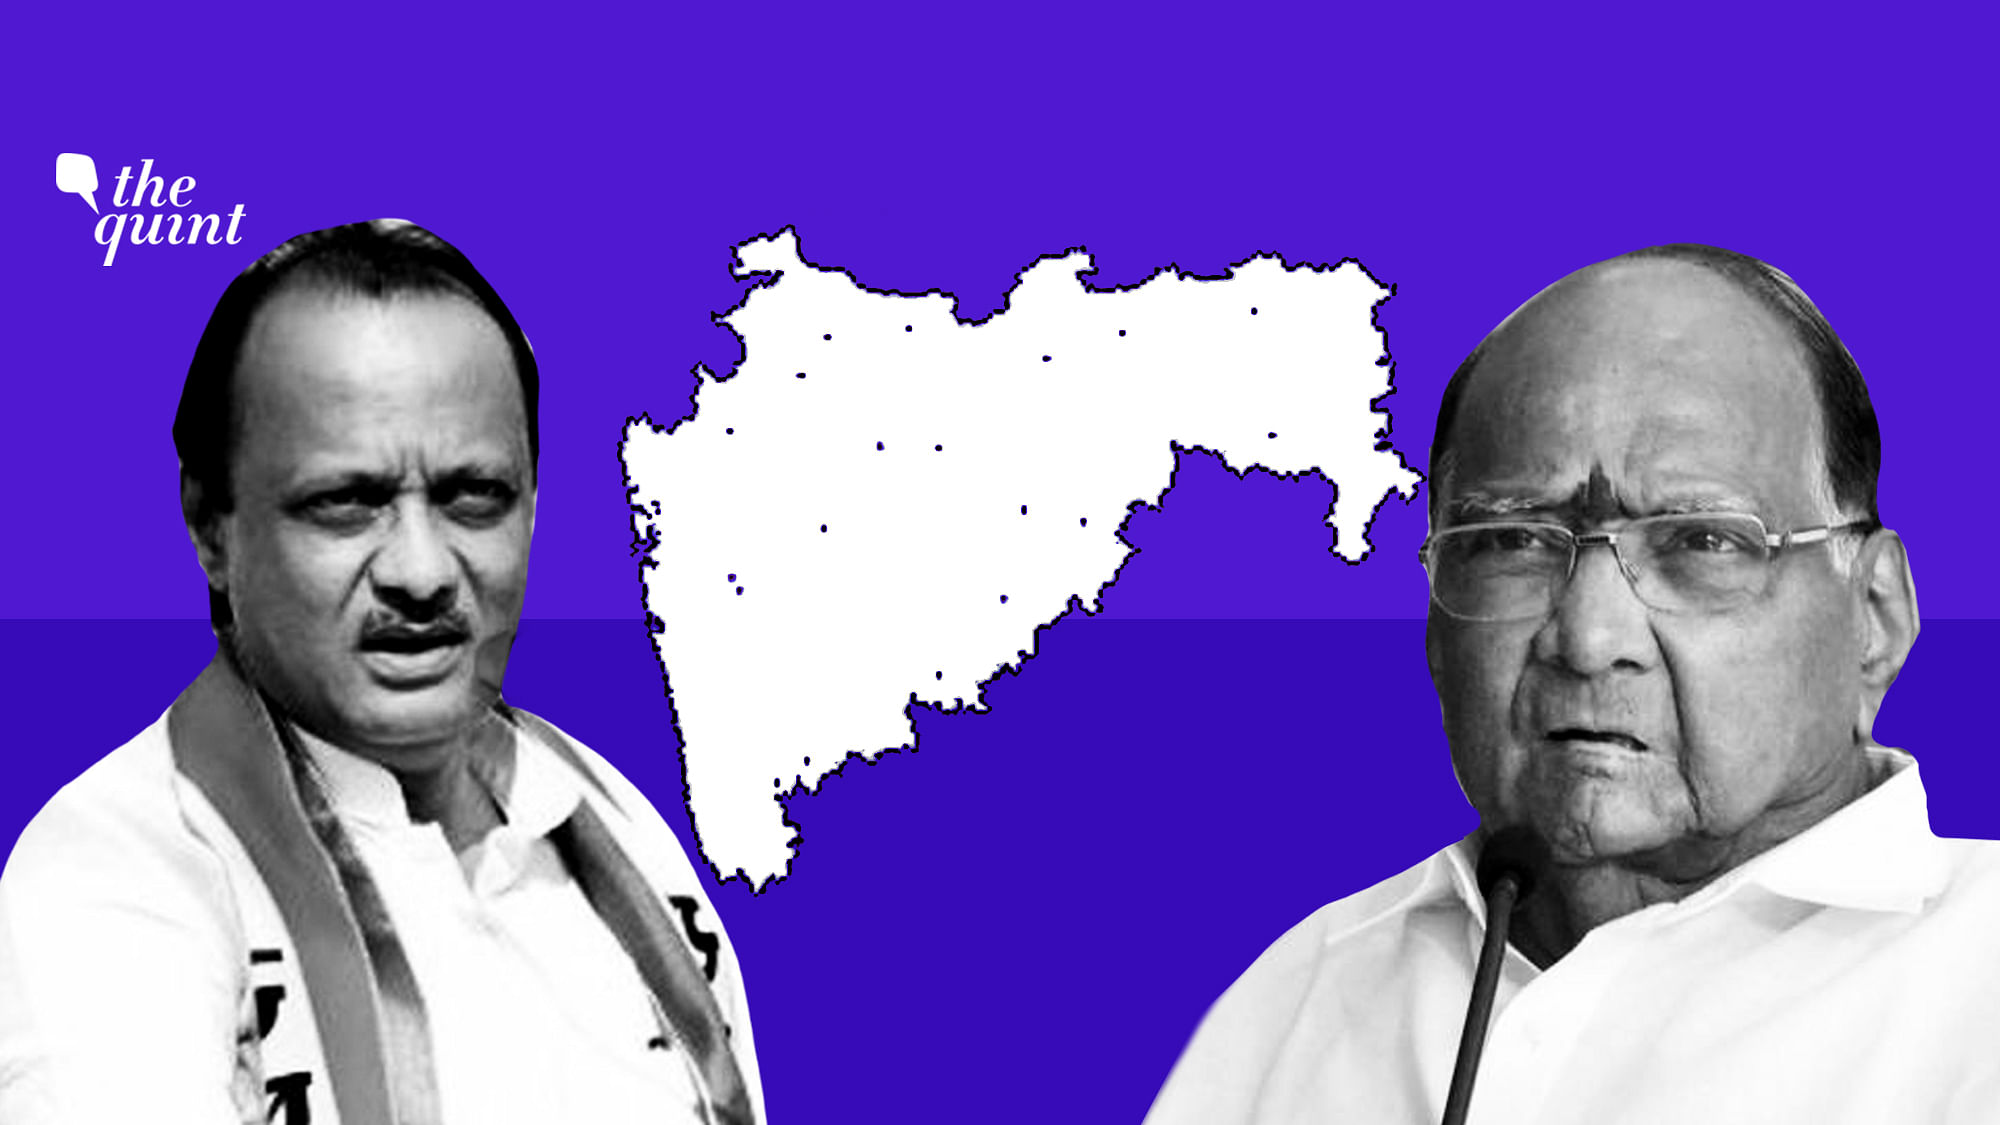 NCP leader Ajit Pawar (on the left) along with NCP supermo Sharad Pawar on the right.